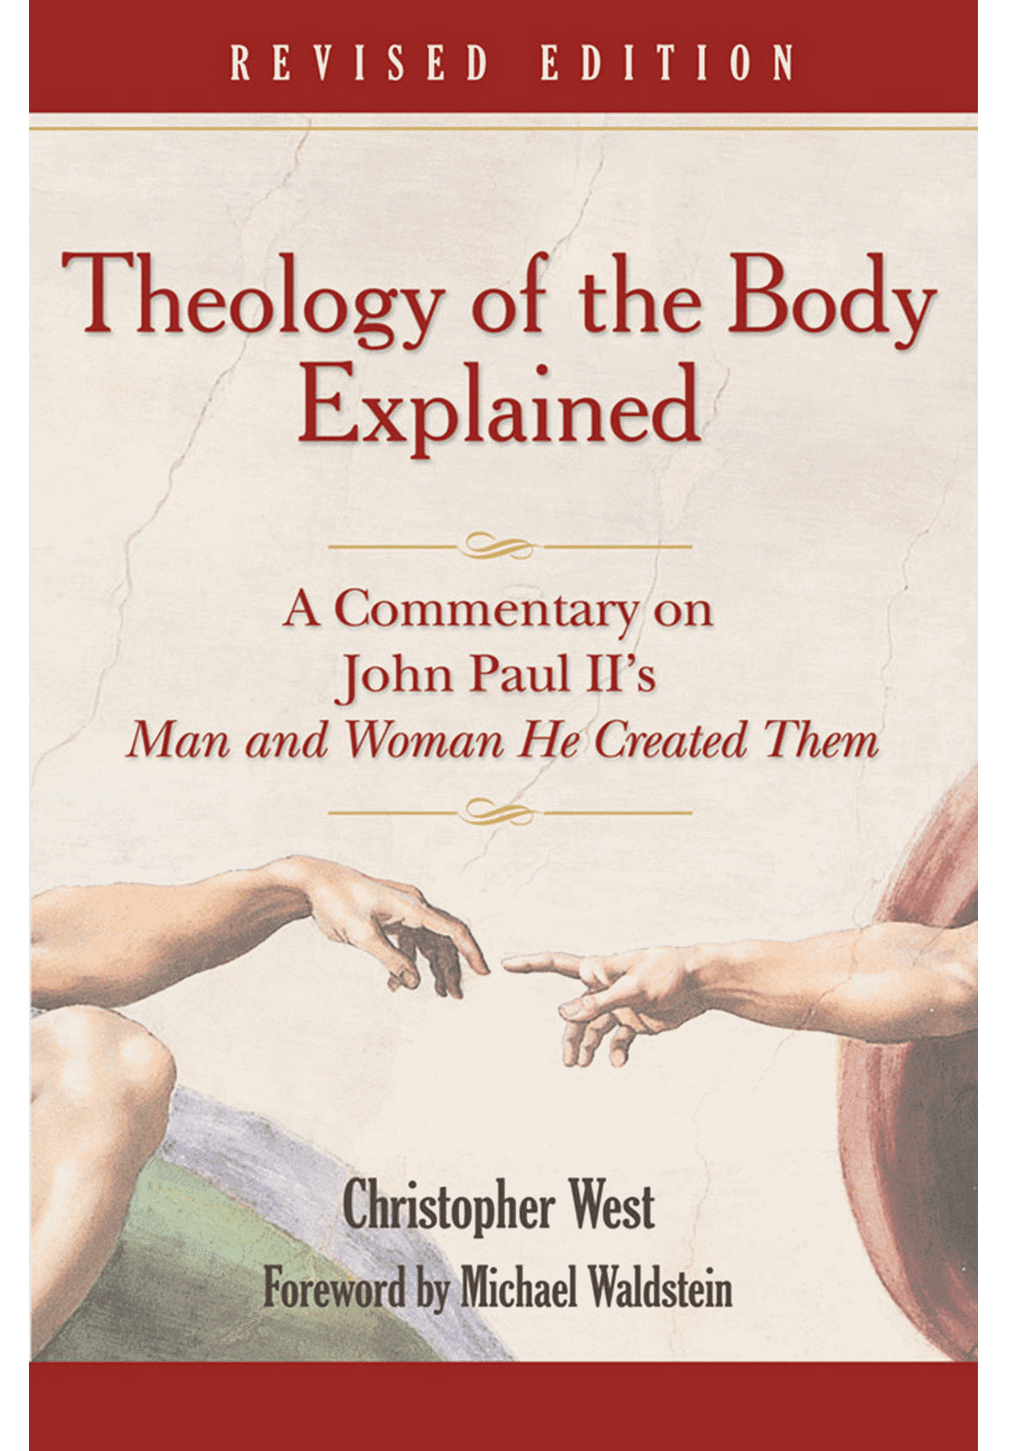 THEOLOGY OF THE BODY EXPLAINED